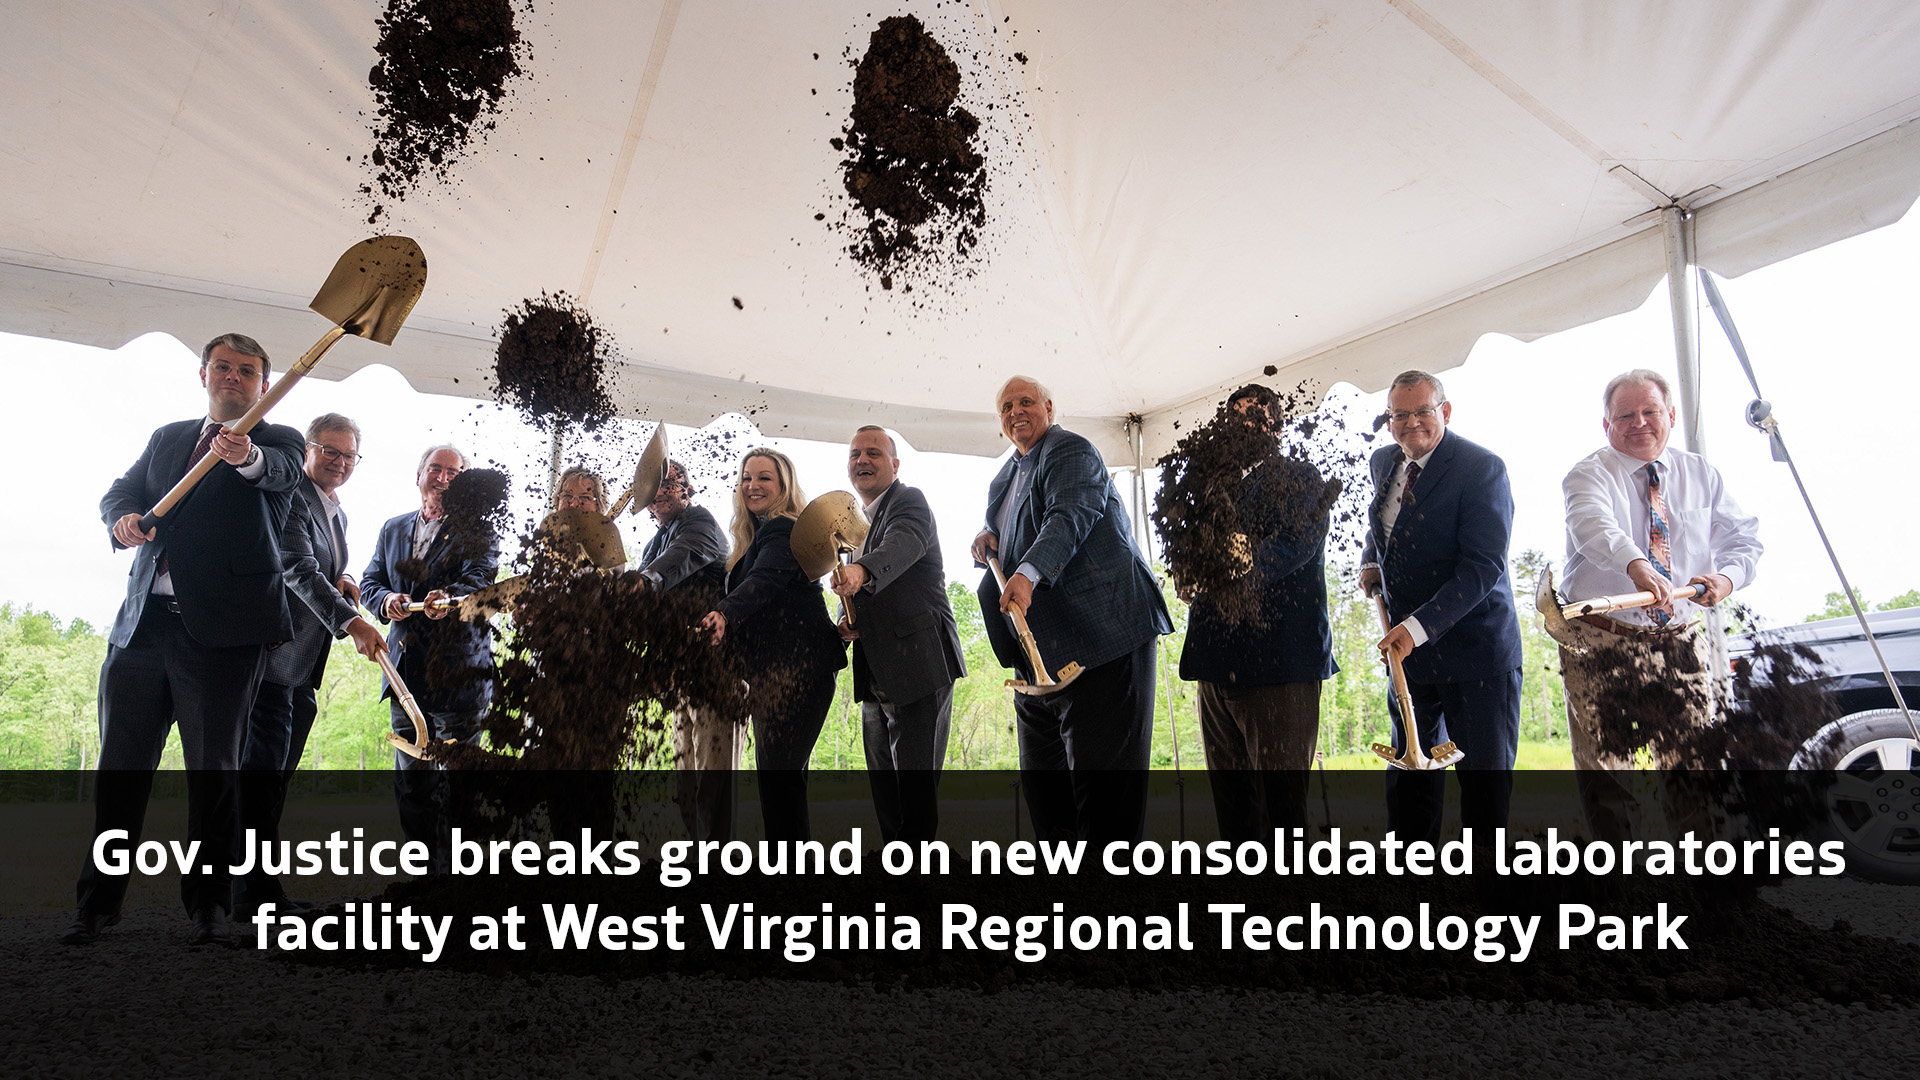 Governor Justice Breaks Ground on New Integrated Laboratory Facility at West Virginia Regional Technology Park